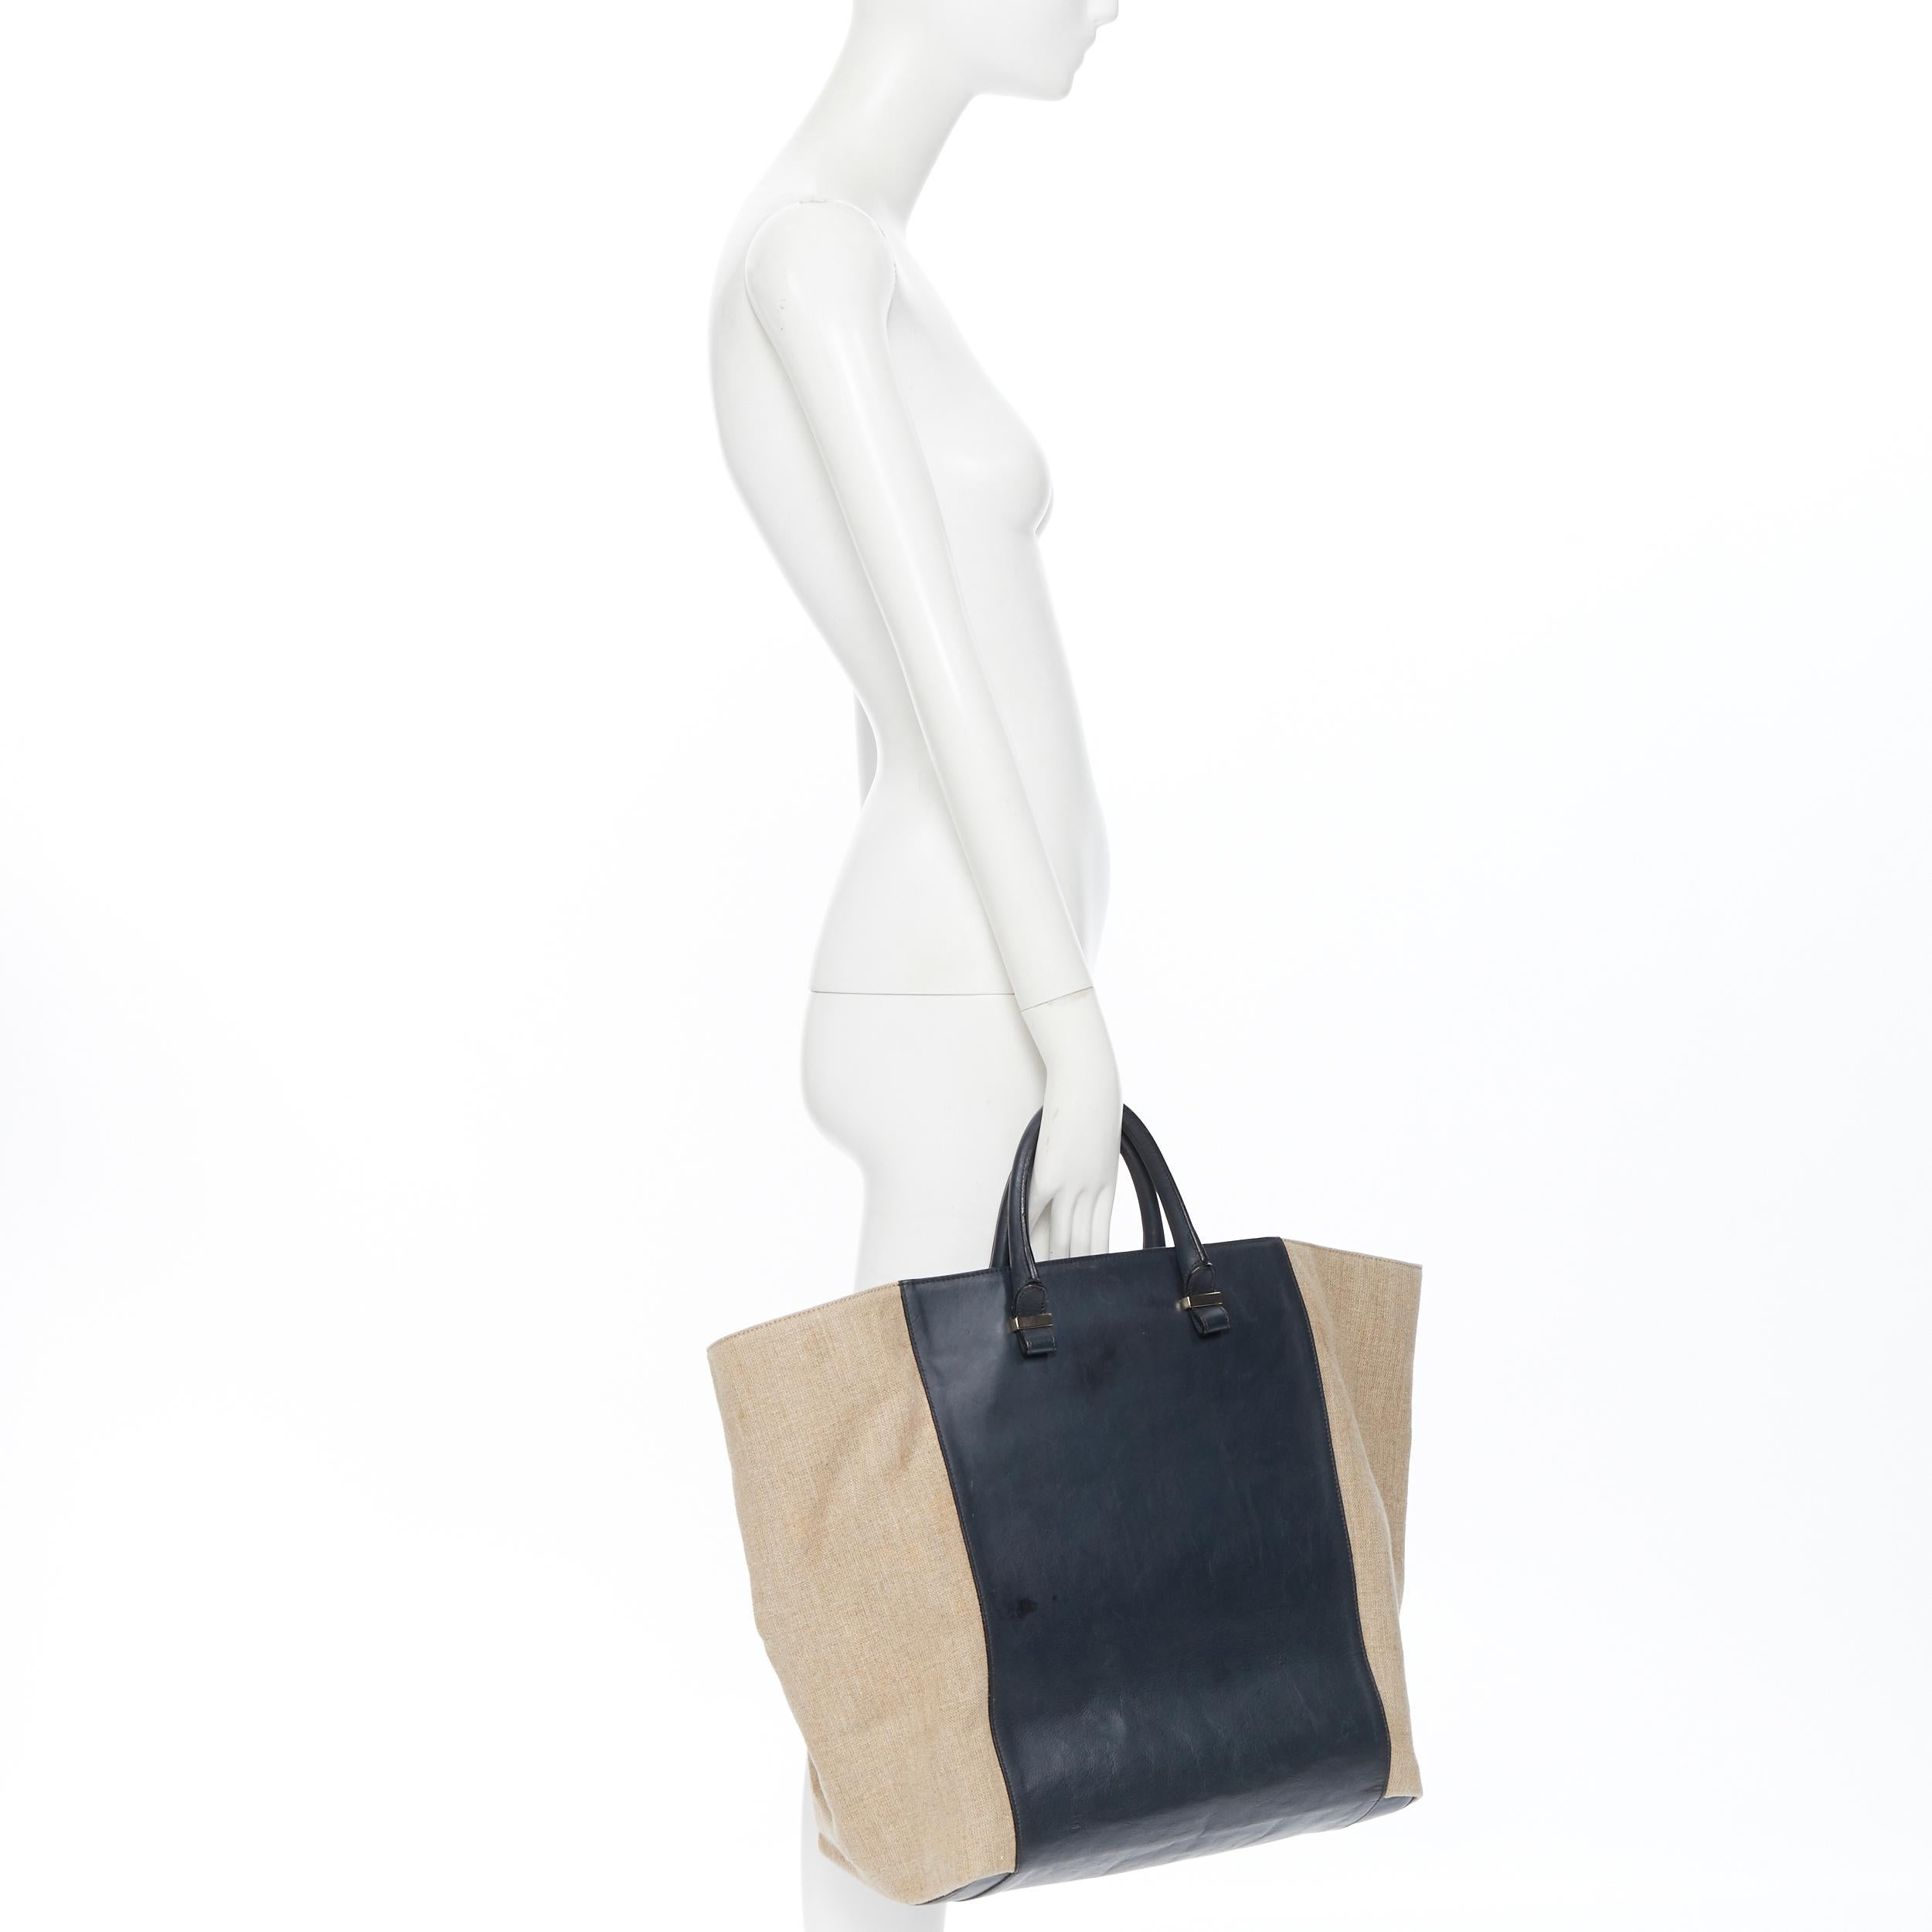 VICTORIA BECKHAM black leather beige canvas flared side large casual tote bag
Brand: Victoria Beckham
Designer: Victoria Beckham
Model Name / Style: Tote bag
Material: Leather, canvas
Color: Black, beige
Pattern: Solid
Extra Detail: Flared sides